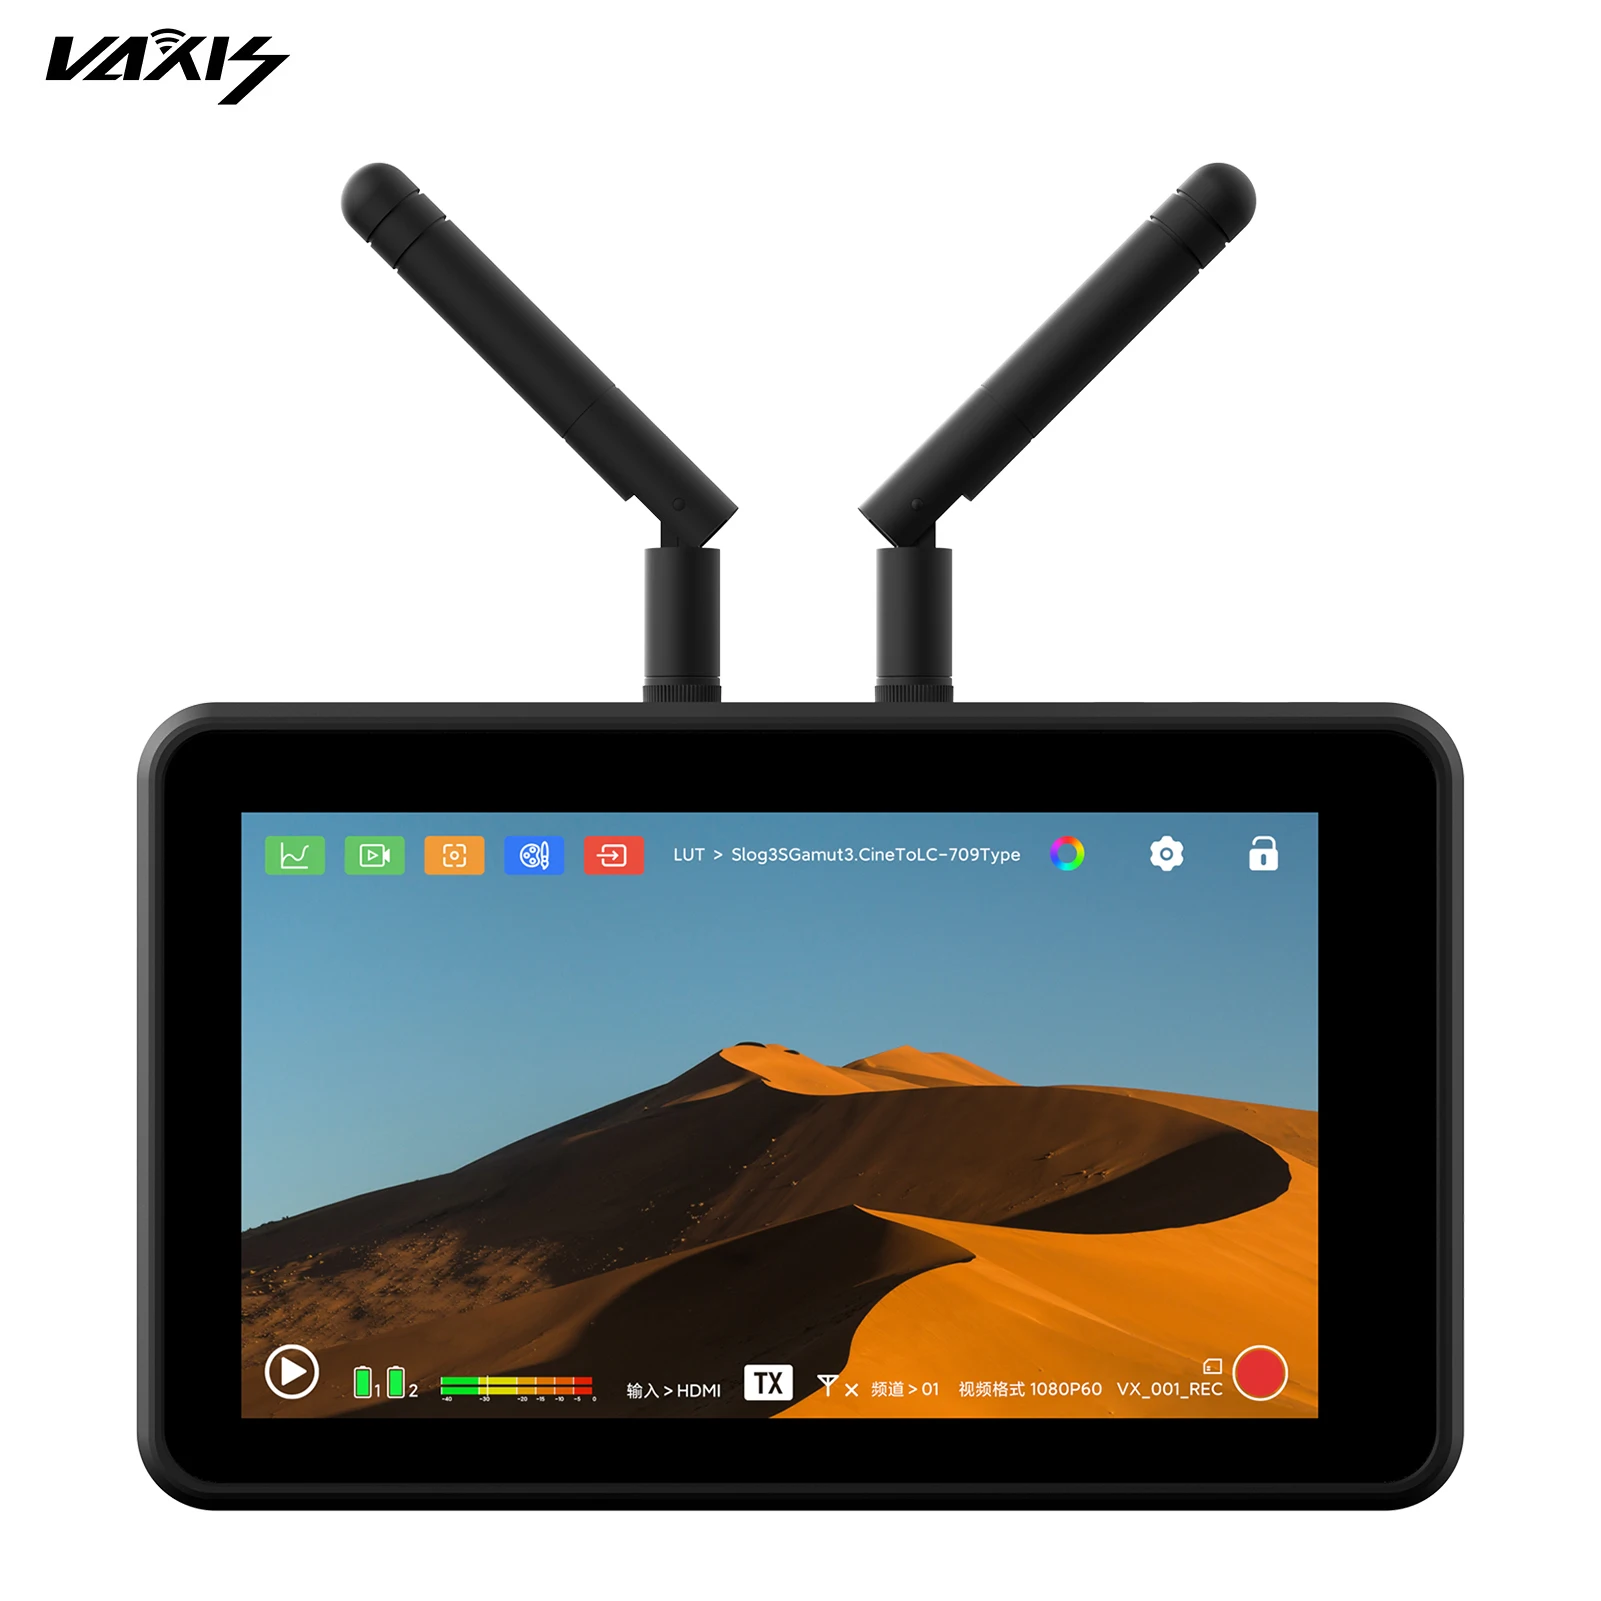 

VAXIS ATOM A5 5.5 Inch Wireless Video Monitor 1000nit Ultra-bright Camera Monitor TX/RX System 1920 * 1080 Screen Touch Control